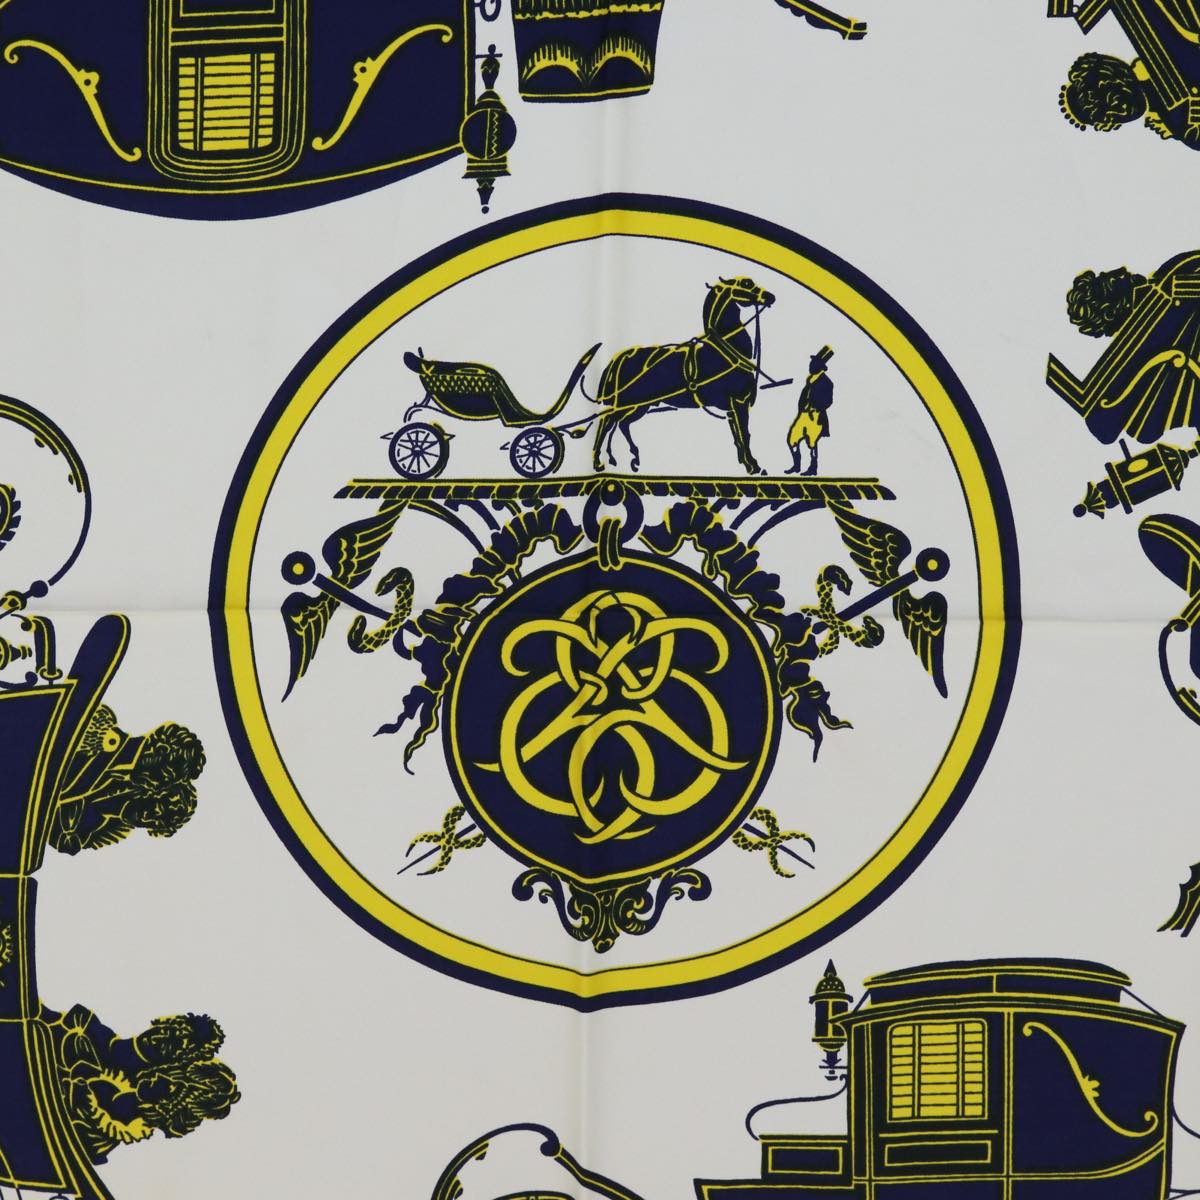 HERMES Carre 90 Horse Carriage Pattern Scarf Silk Yellow Auth bs13784